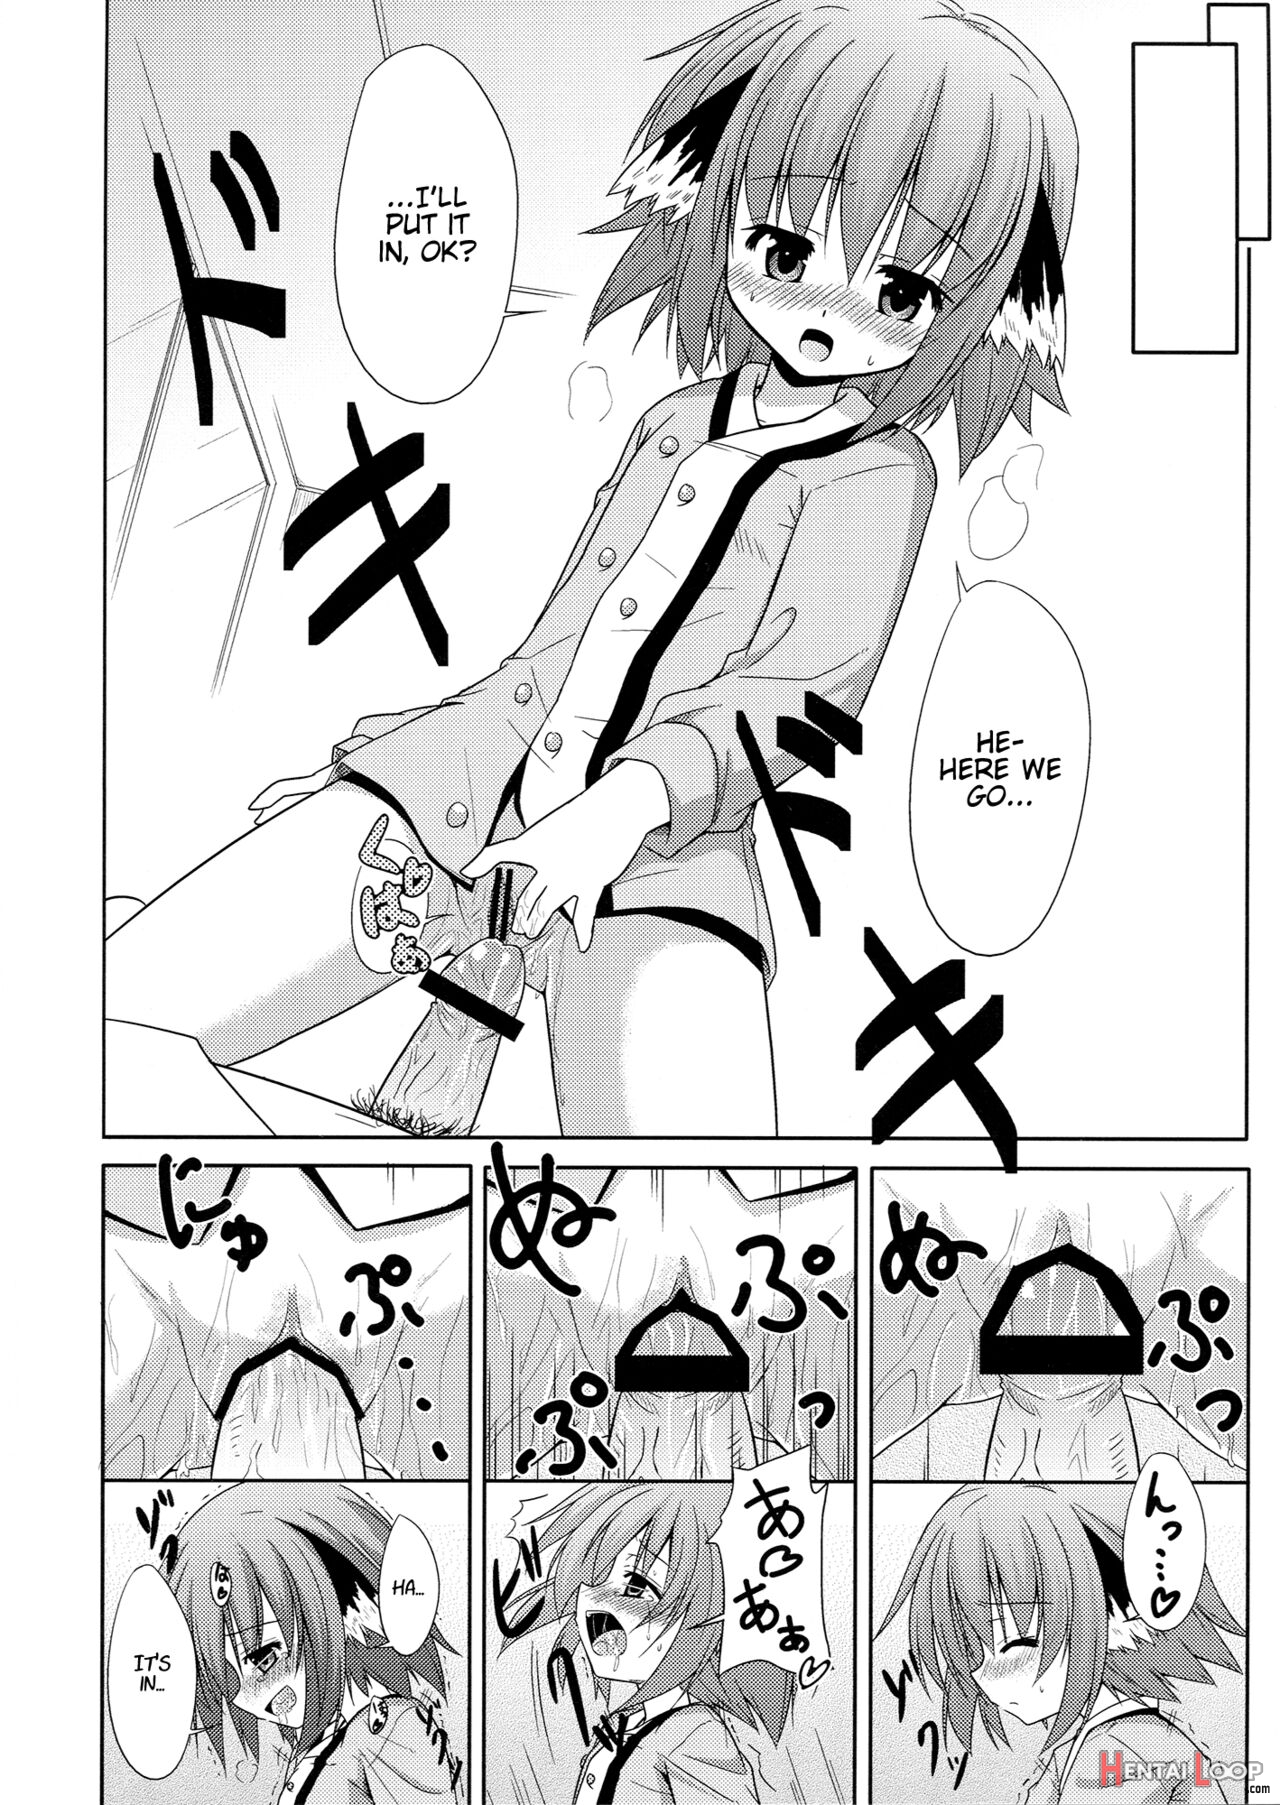 Kyouko's Daily Life page 13